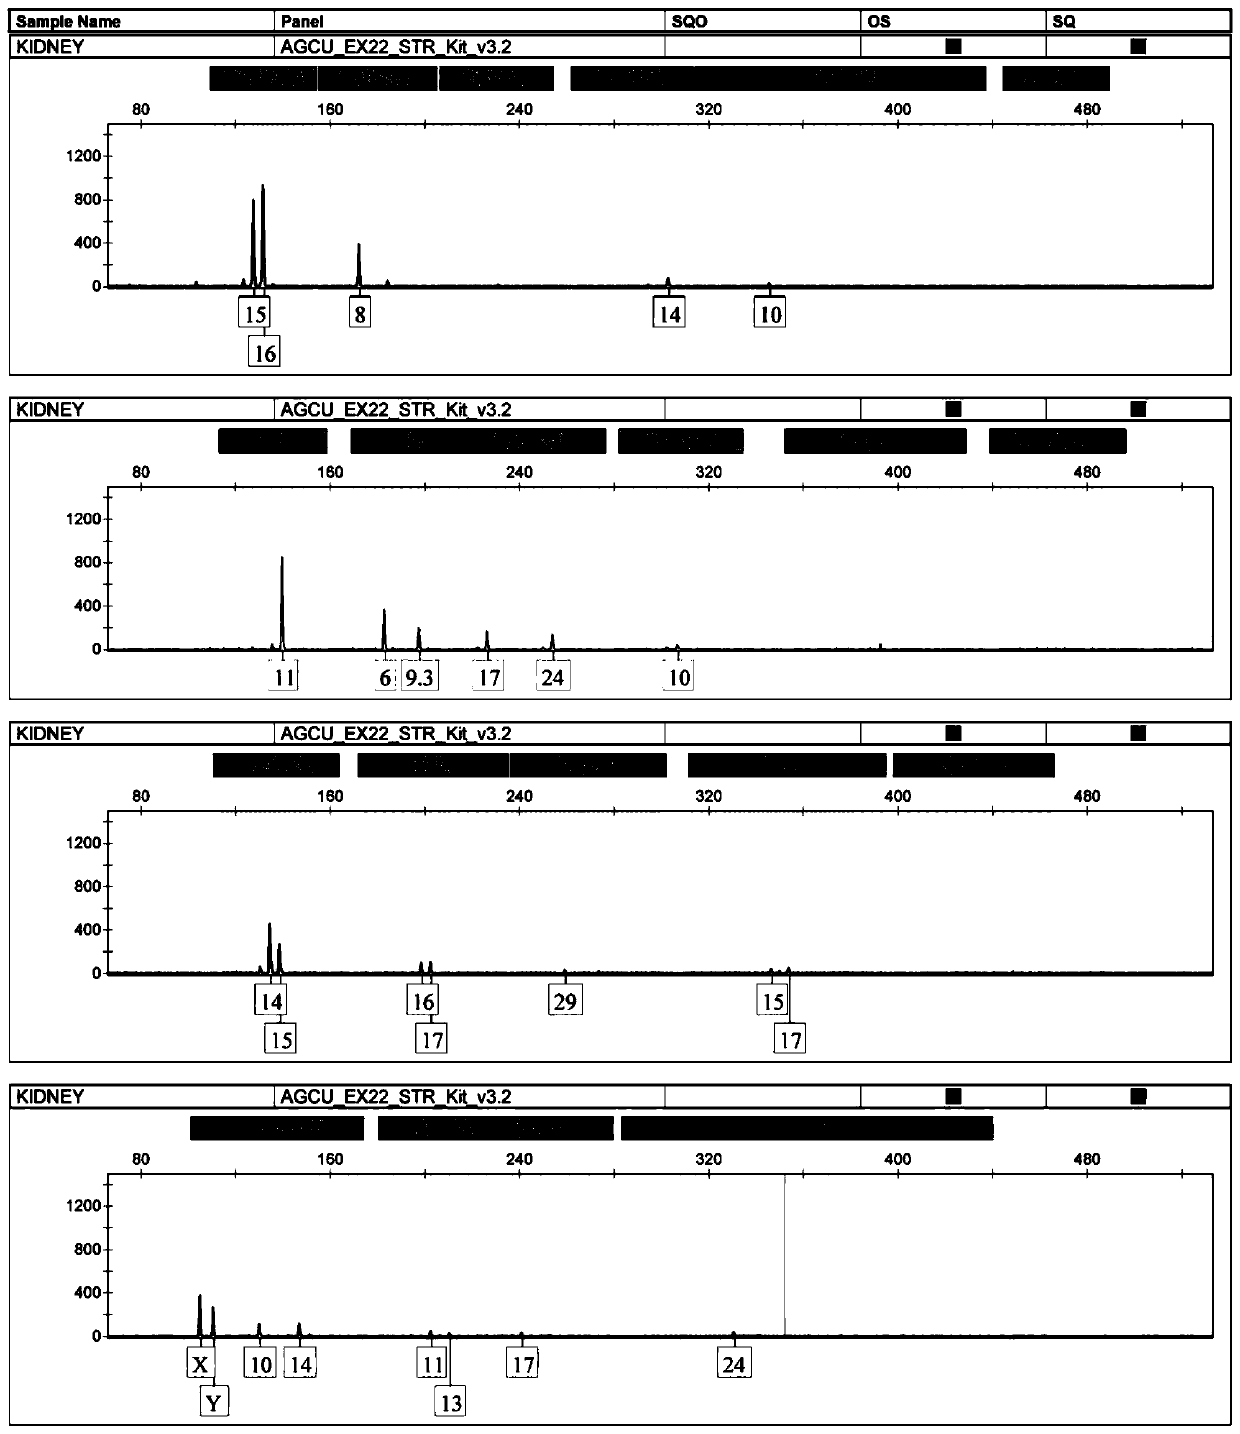 Fluorescent-labeled 32-plex InDels composite amplification system and application thereof